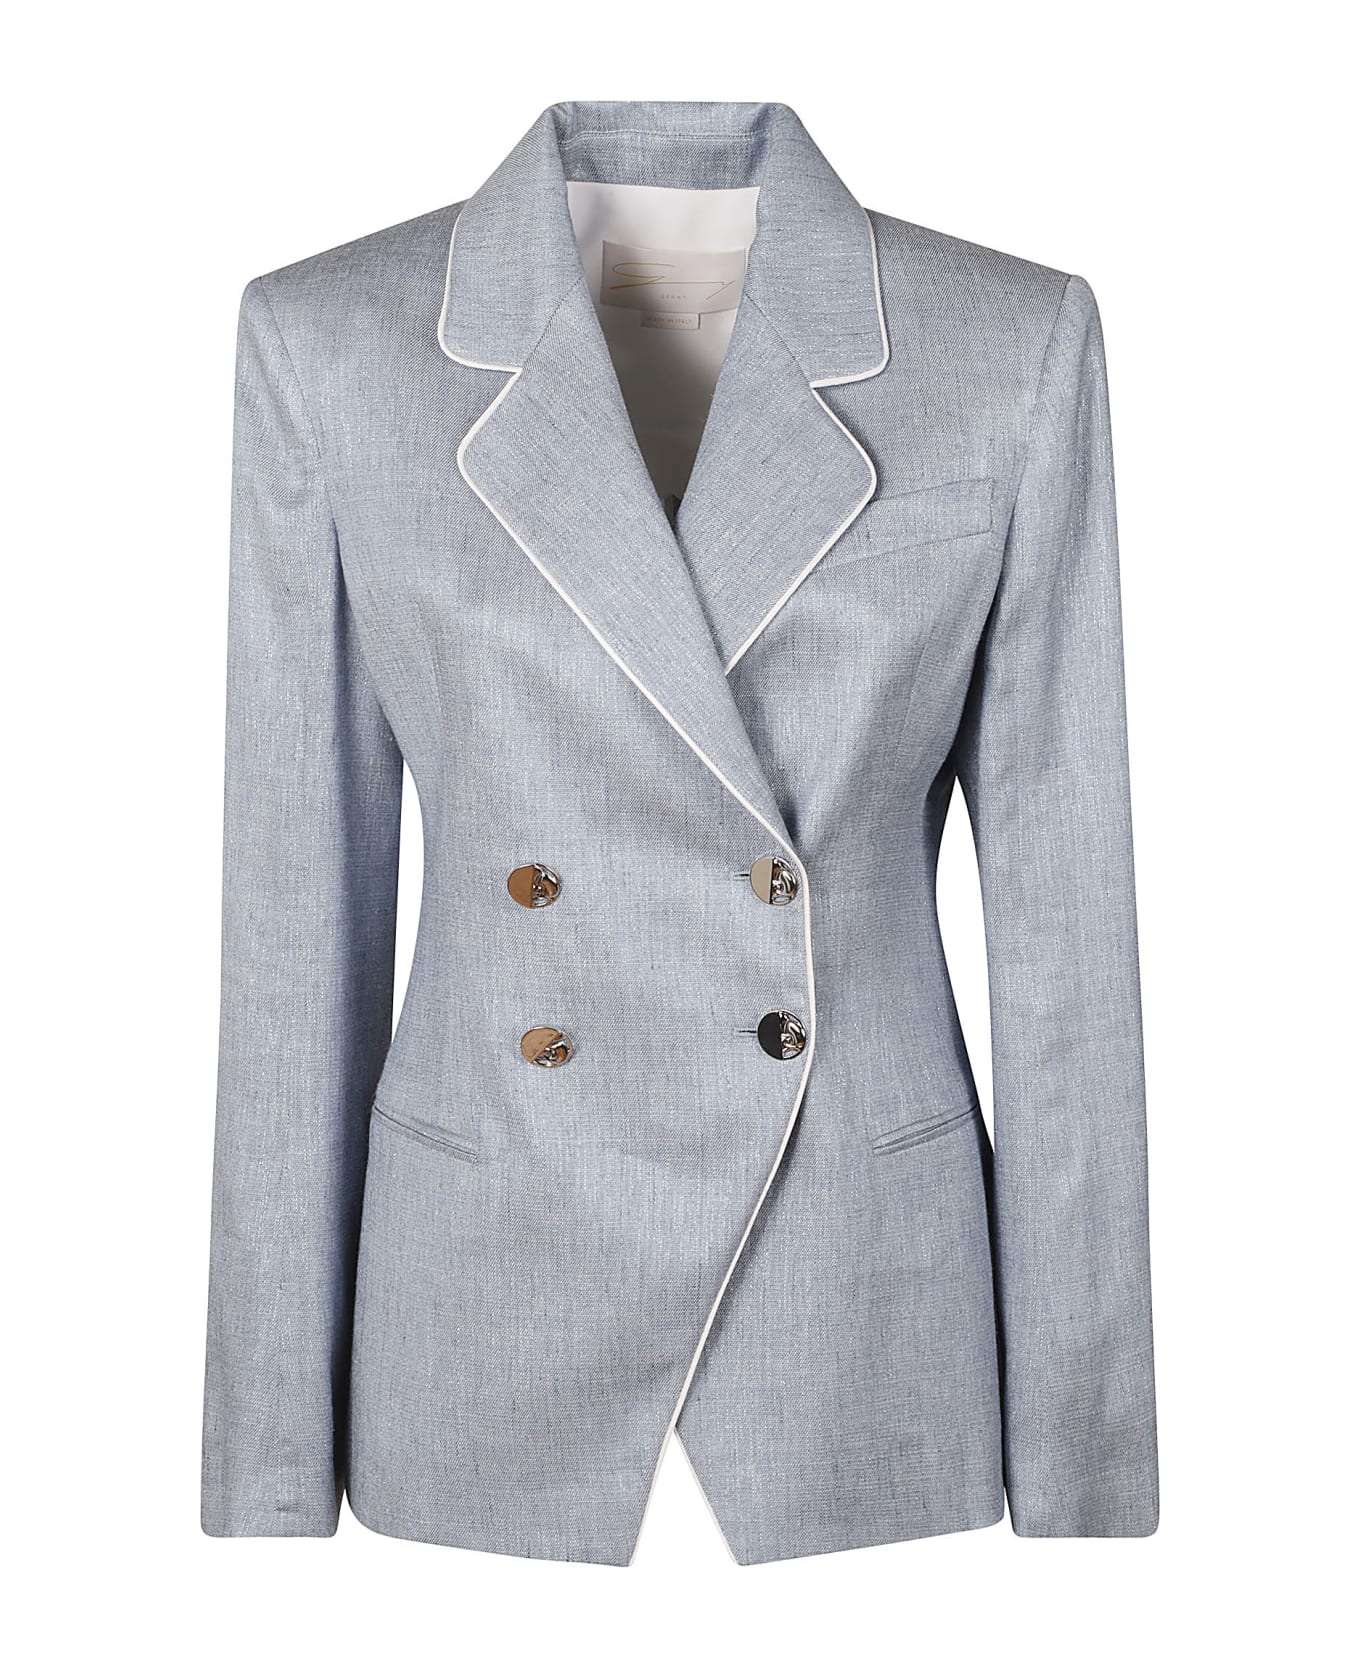 Genny Jacquard Double-breasted Dinner Jacket - LIGHT BLUE